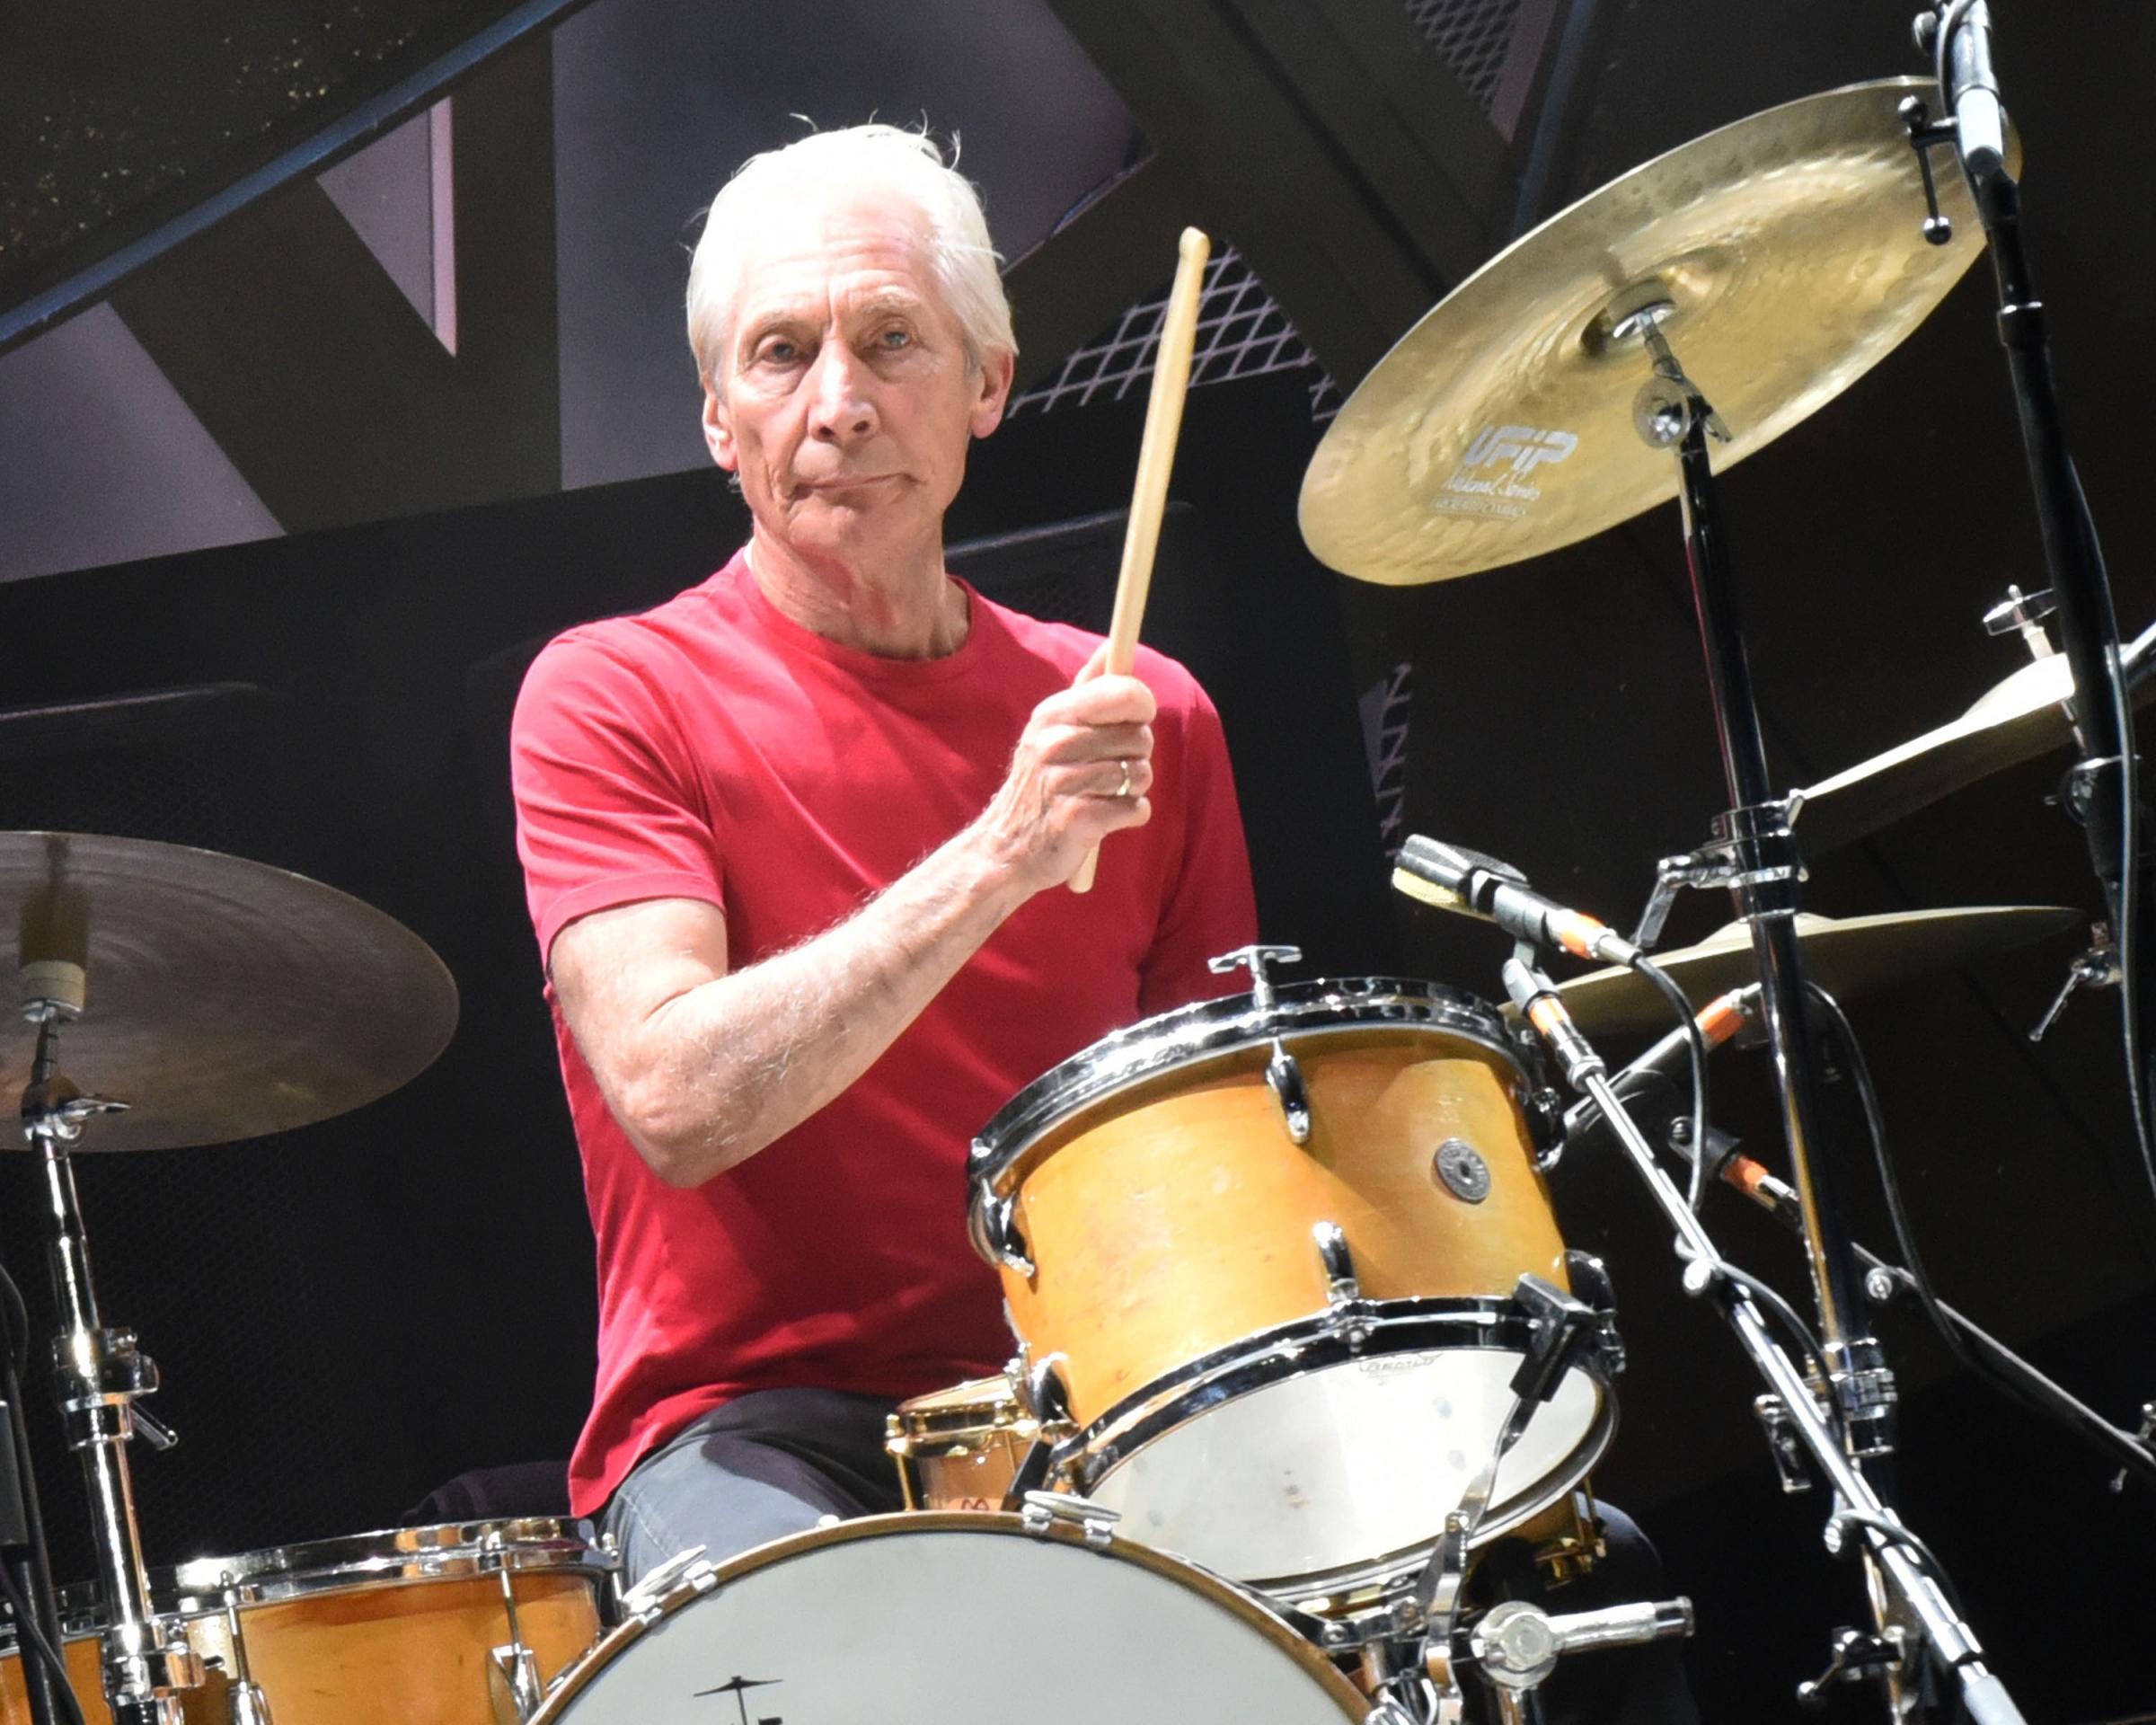 RALEIGH, NC - JULY 01: Charlie Watts of The Rolling Stones performs at Carter Finley Stadium on July 1, 2015 in Raleigh, North Carolina. (Photo by Chris McKay/Getty Images).